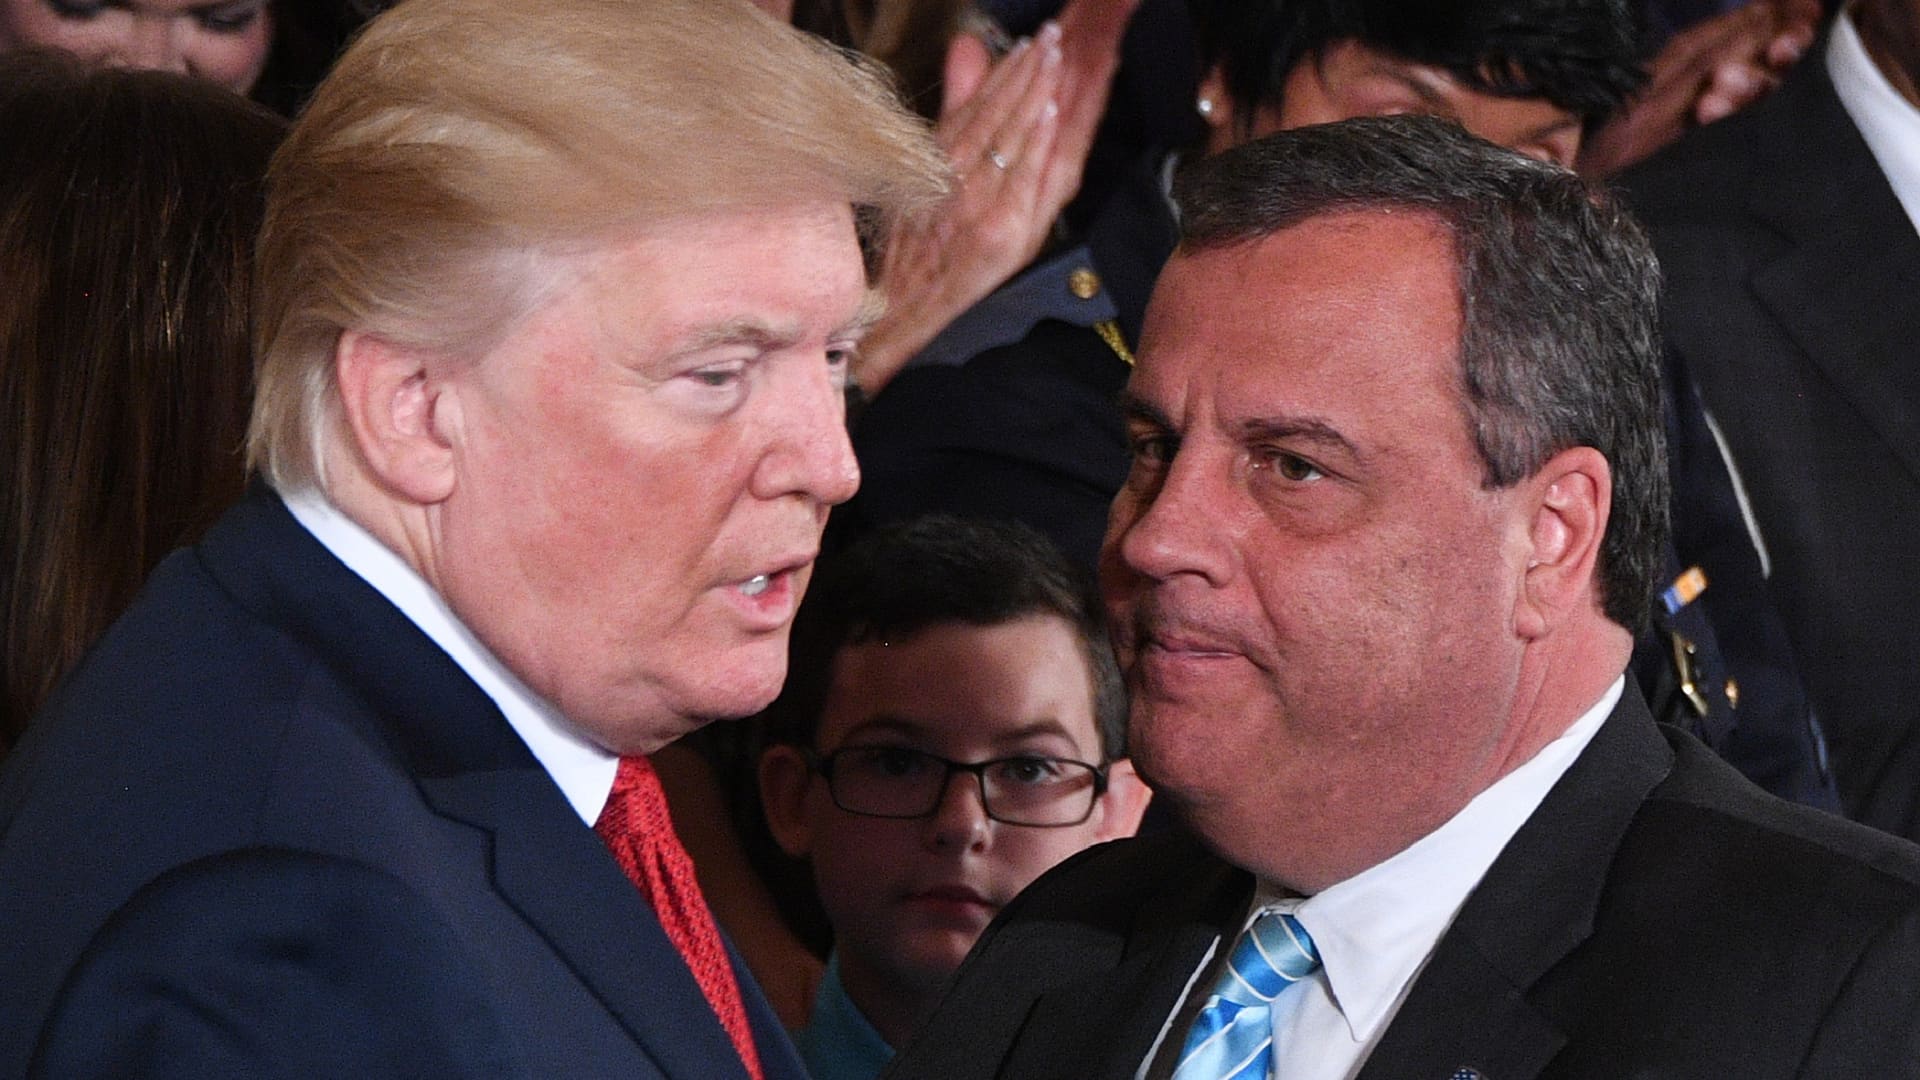 US President Donald Trump (L) speaks with Governor Chris Christie (R-NJ) after he delivered remarks on combatting drug demand and the opioid crisis on October 26, 2017 in the East Room of the White House in Washington, DC.